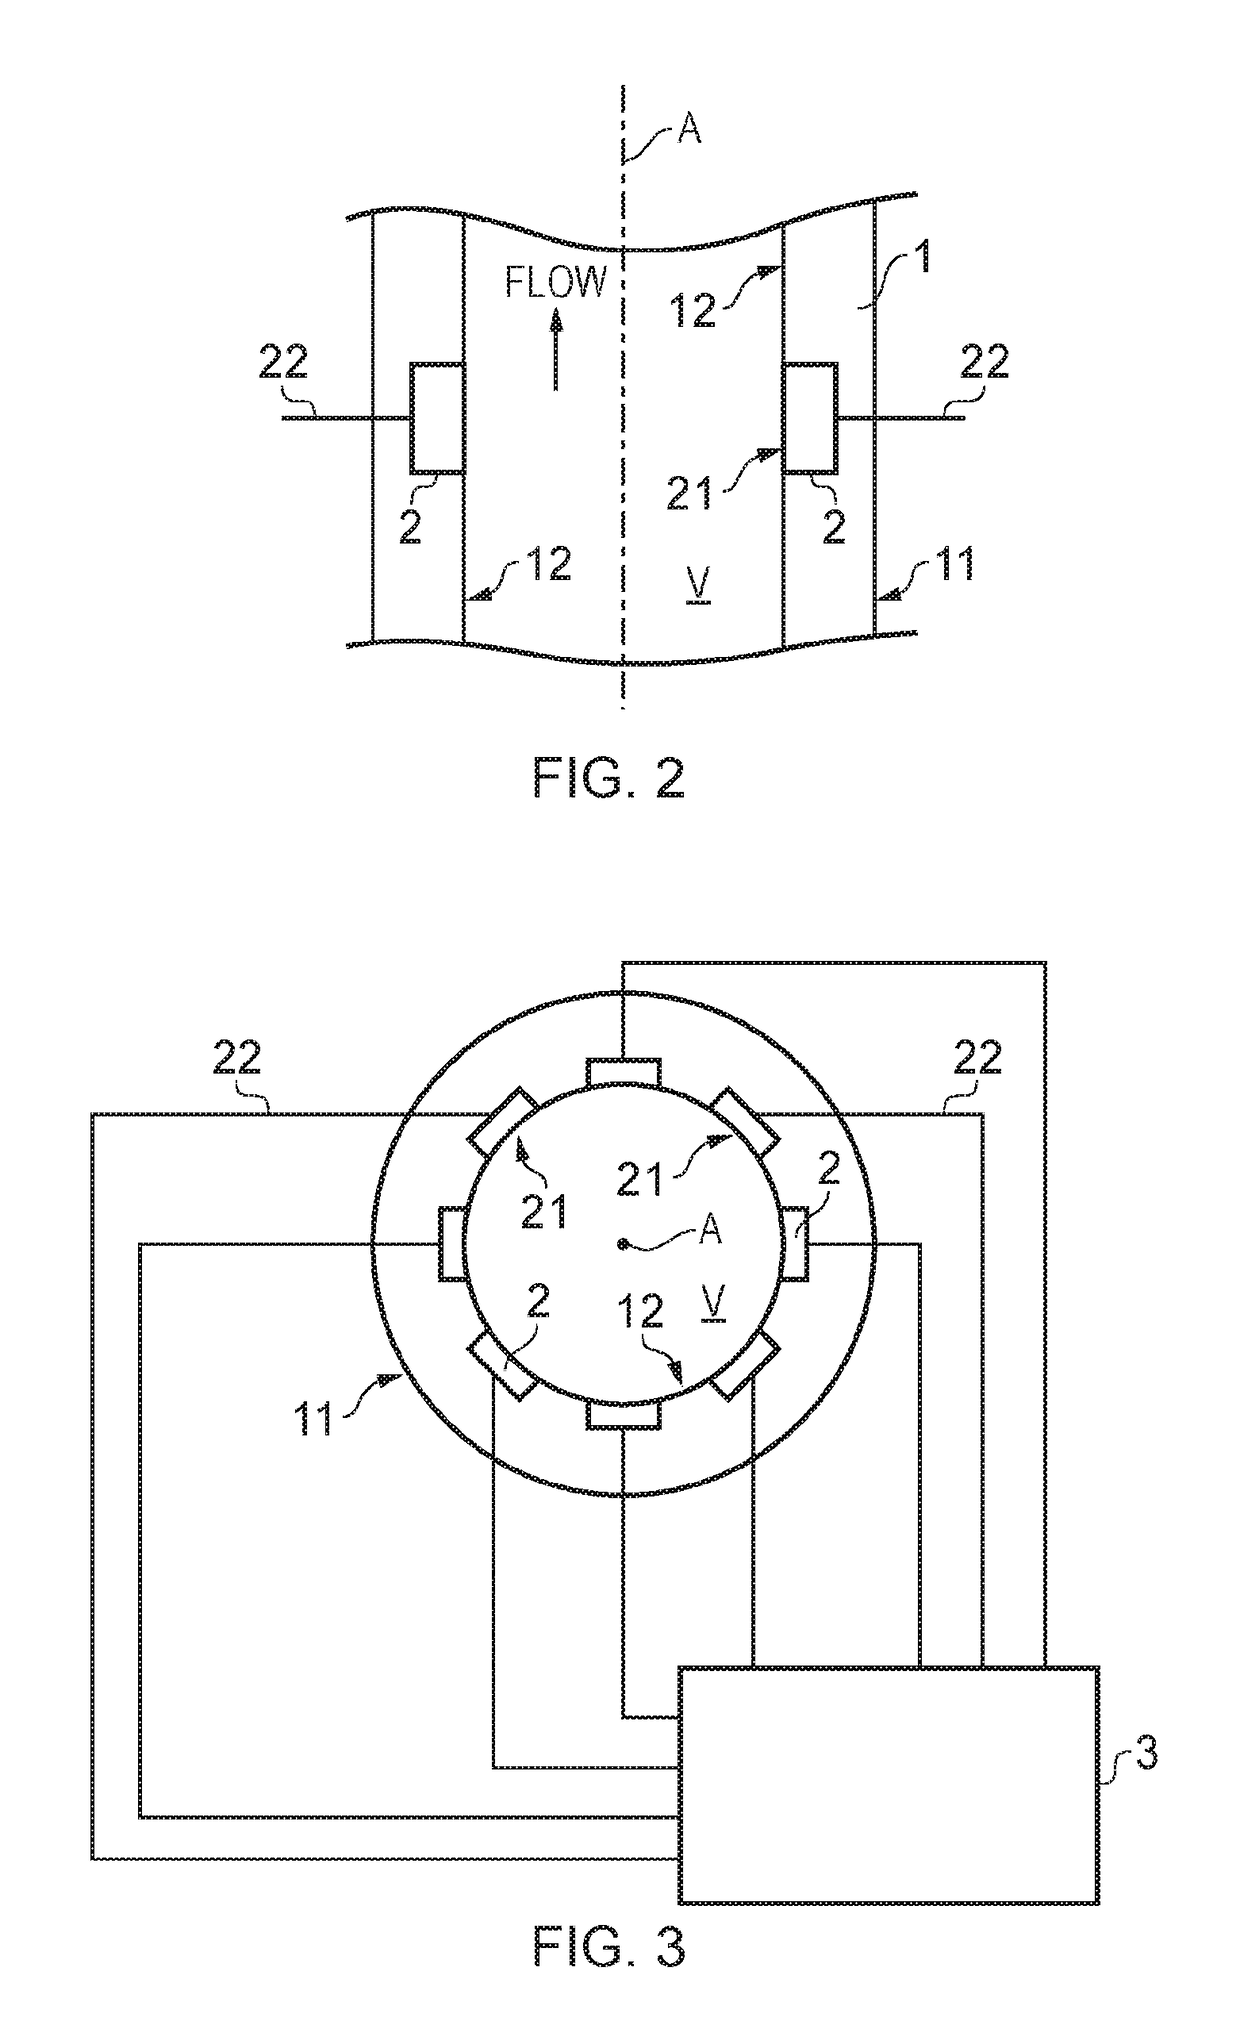 Tomography apparatus, multi-phase flow monitoring system, and corresponding methods